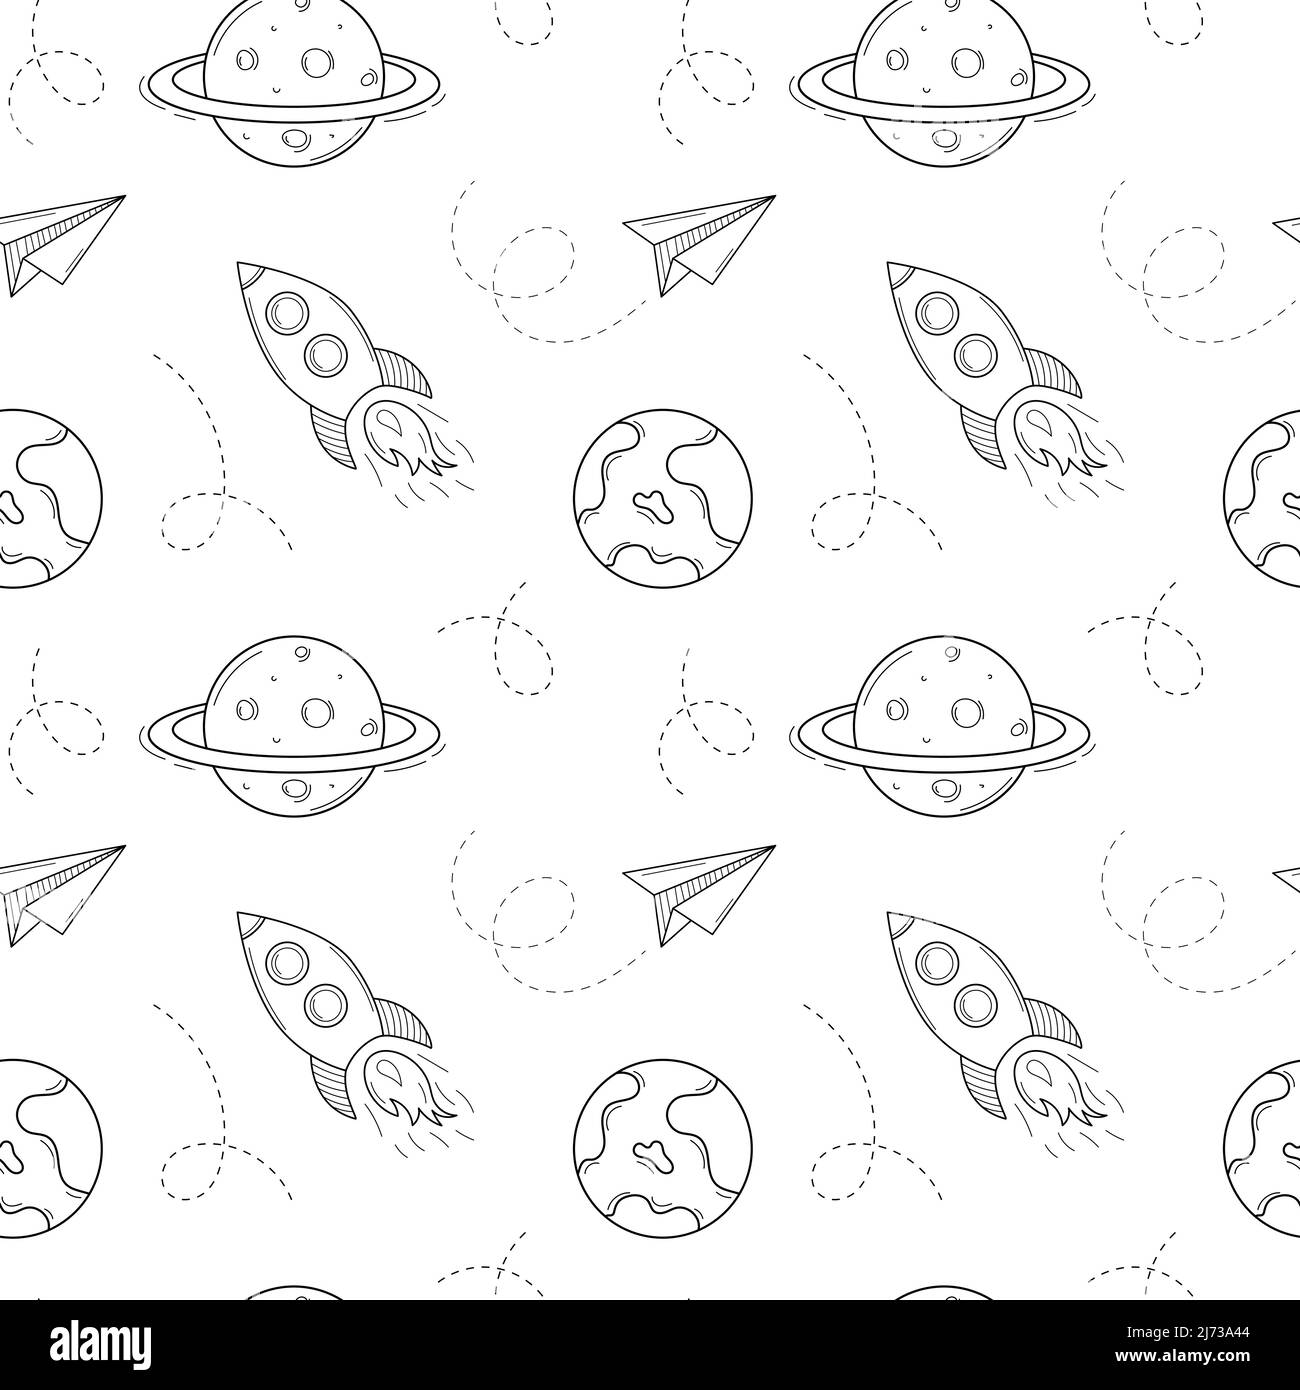 Seamless pattern with space objects, rocket, plane, air trail, planet, earth, saturn. Hand-drawn outline elements. Monochrome design. Black and white Stock Vector